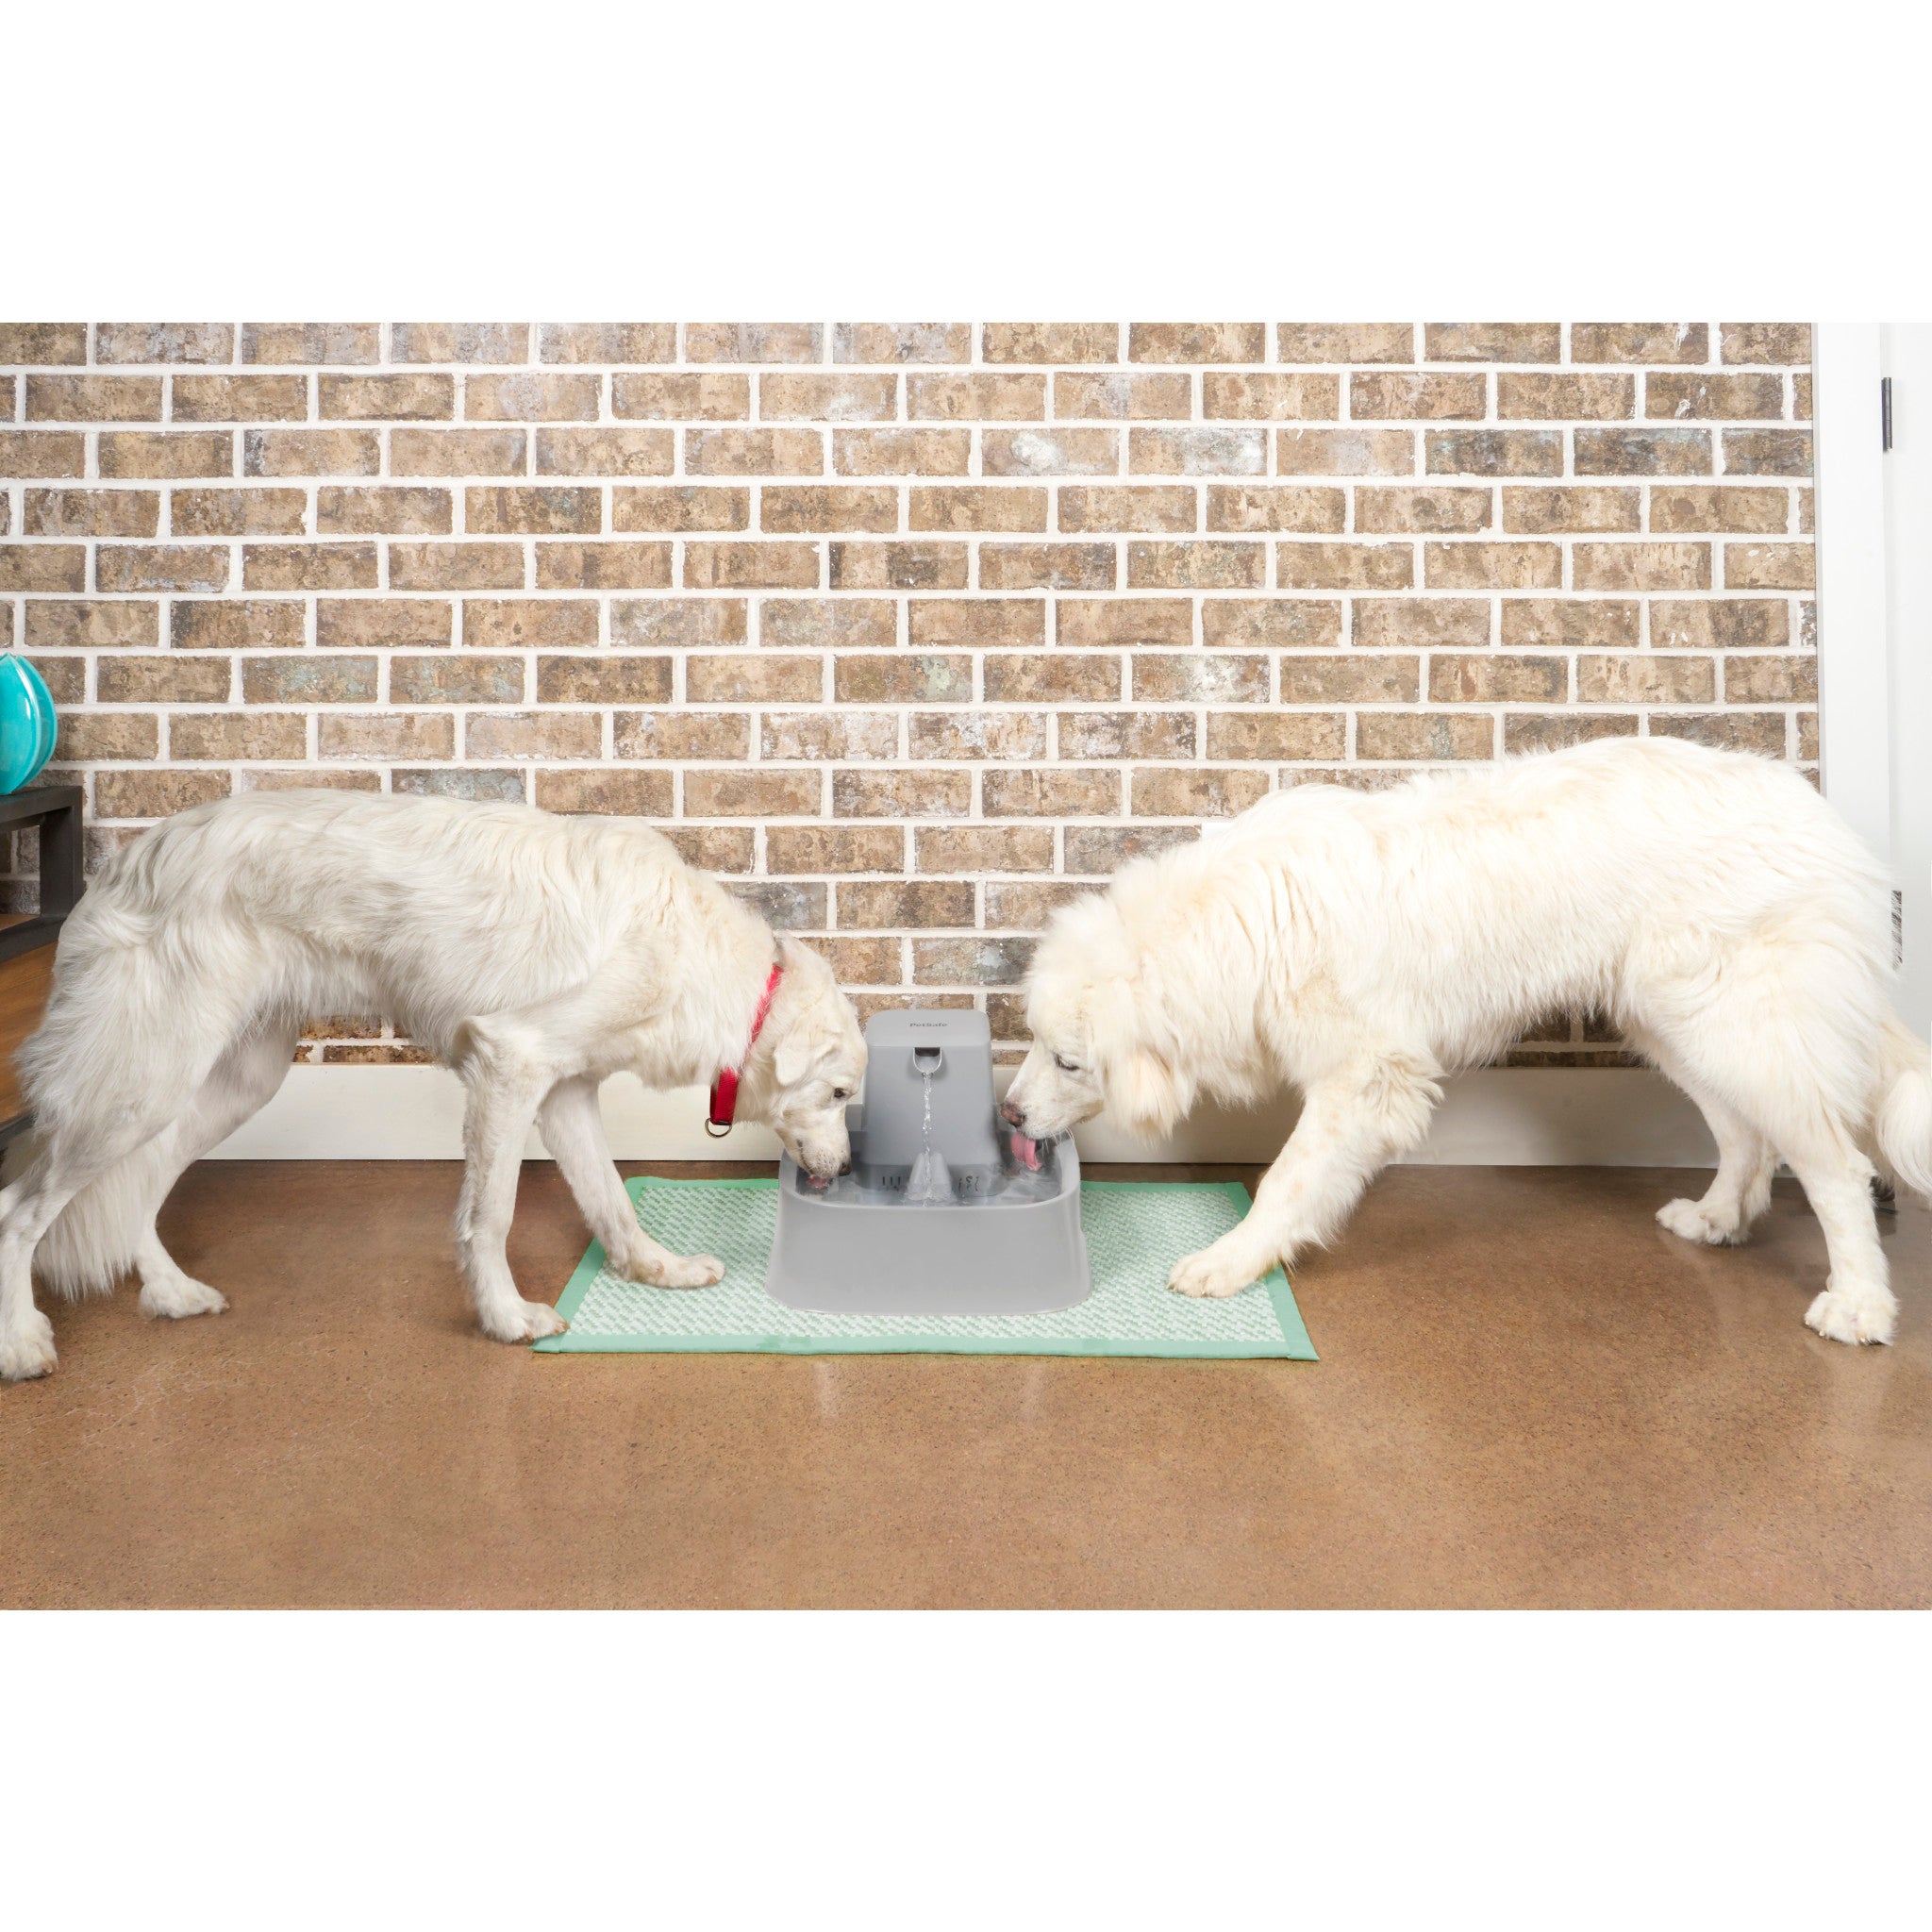 Fontaine pour animaux de 7,5 litres Drinkwell®